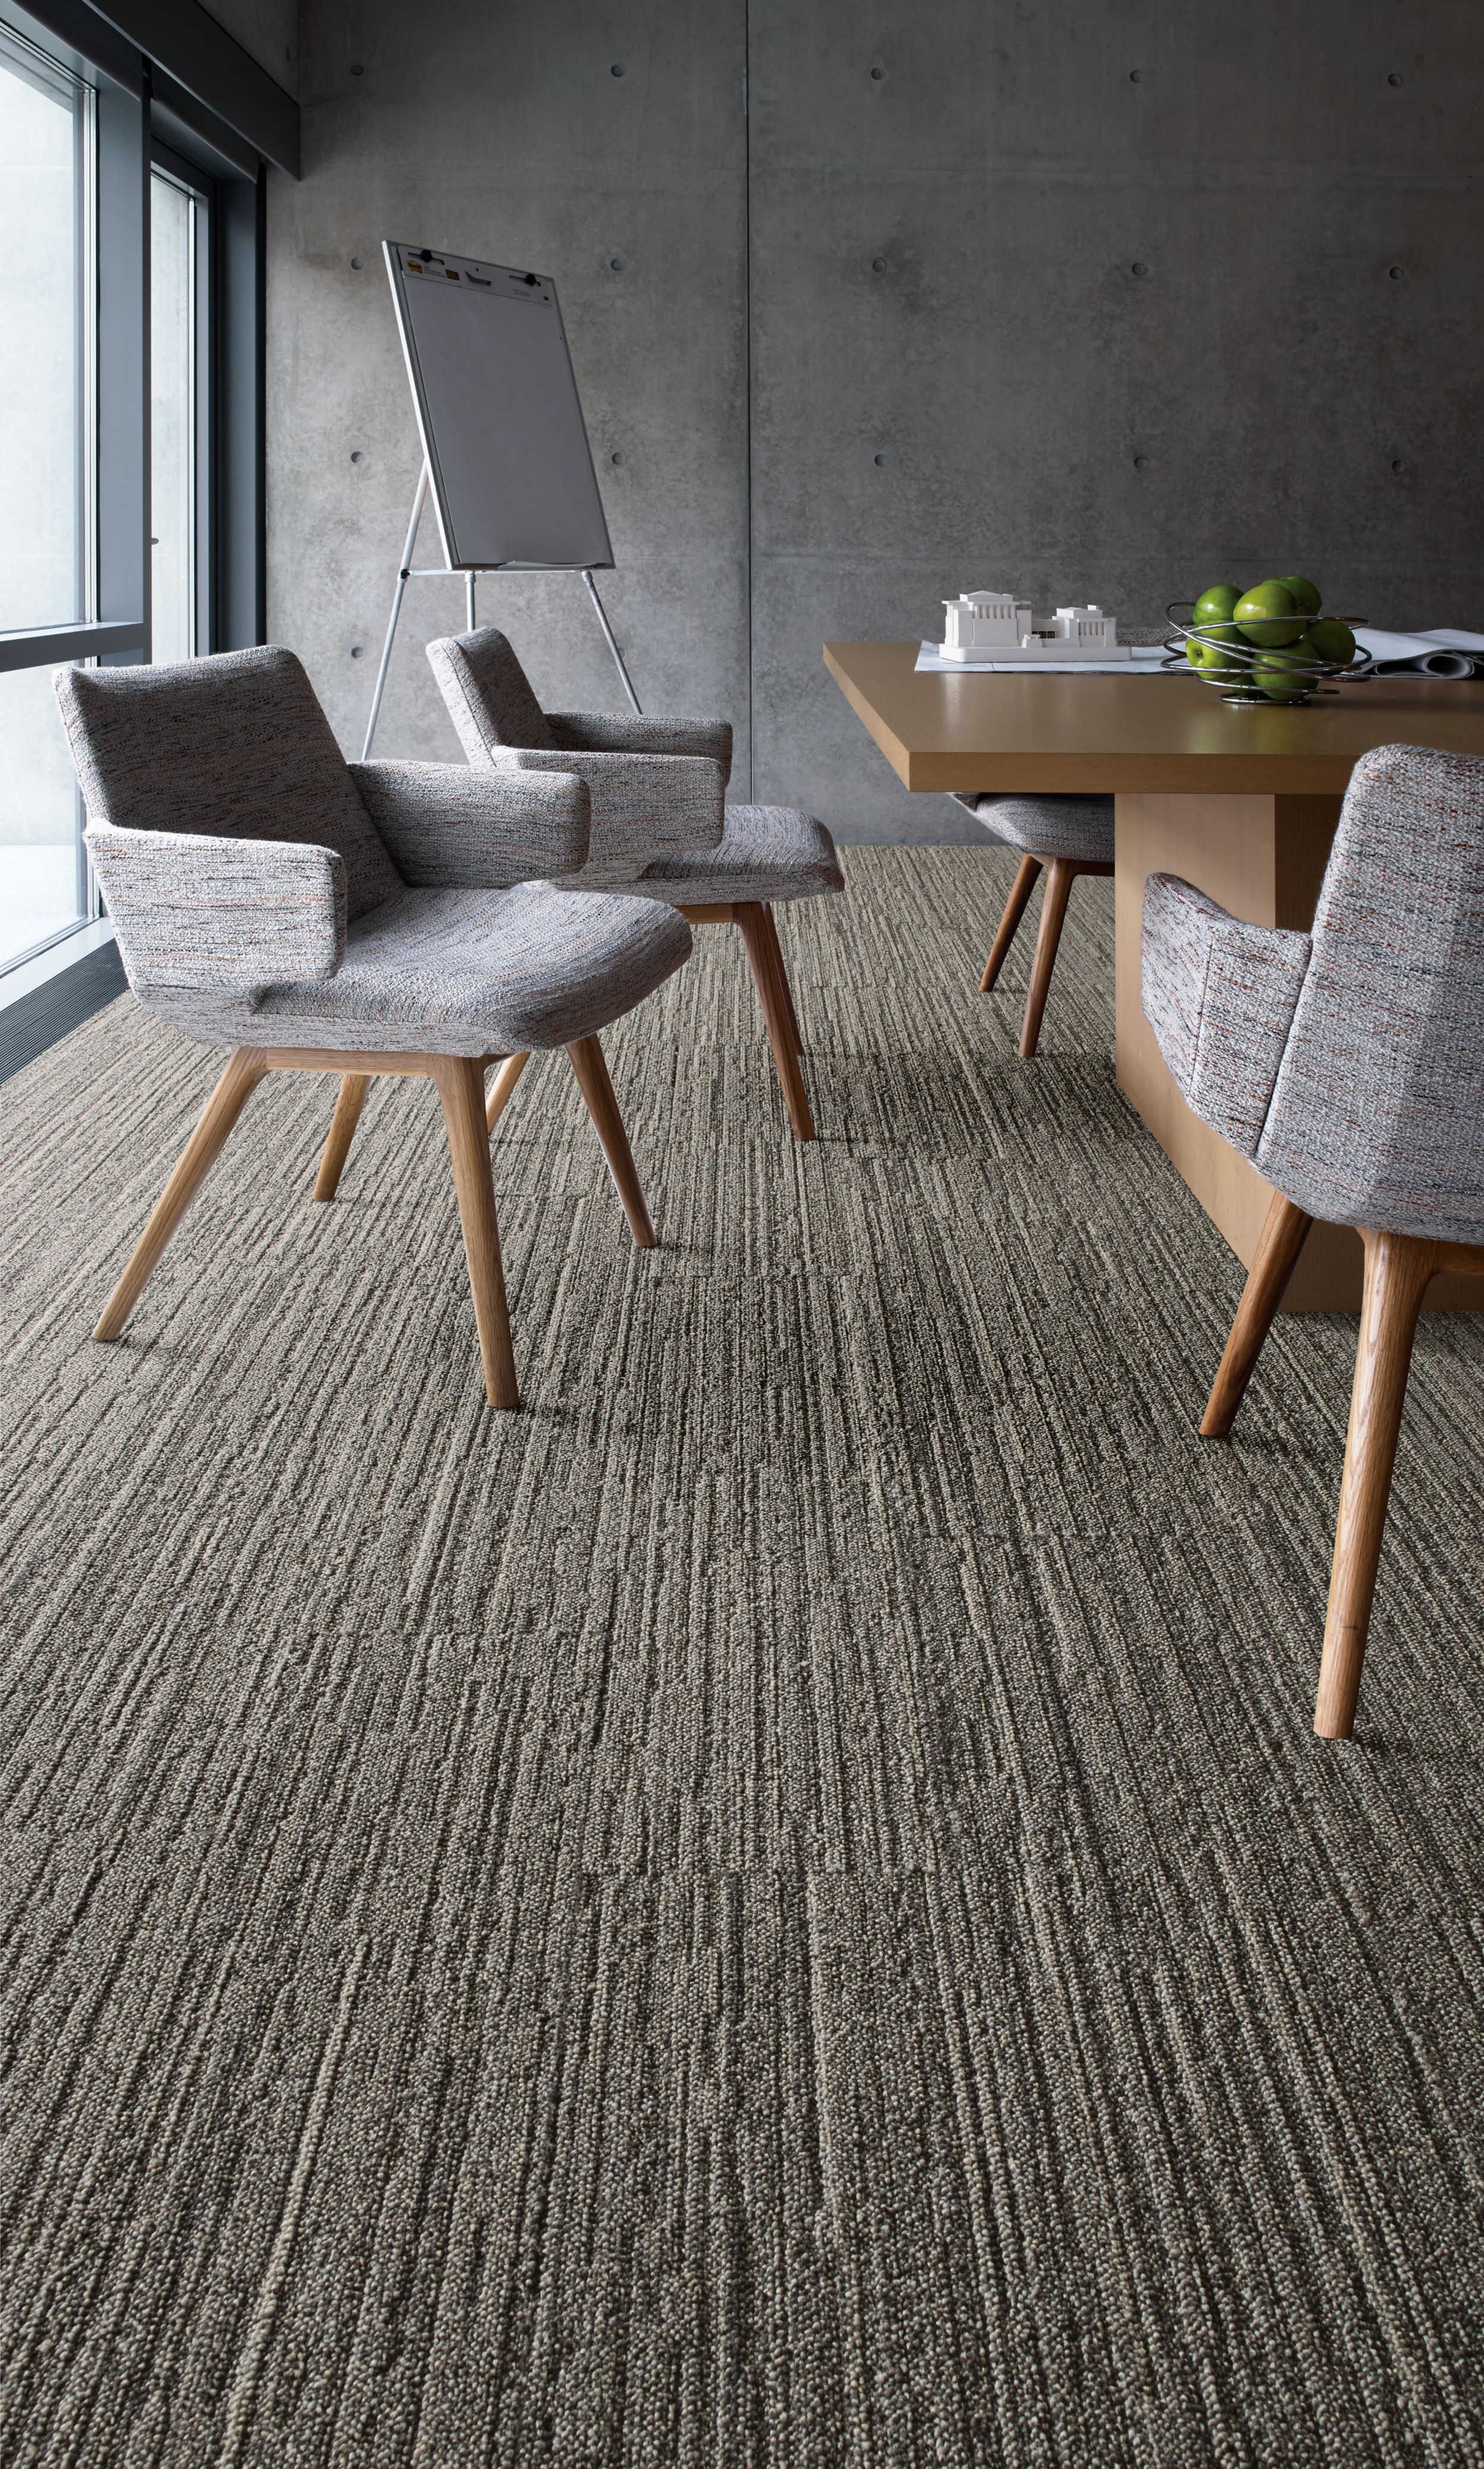 Interface WW880 plank carpet tile in meeting room with table and chairs número de imagen 1